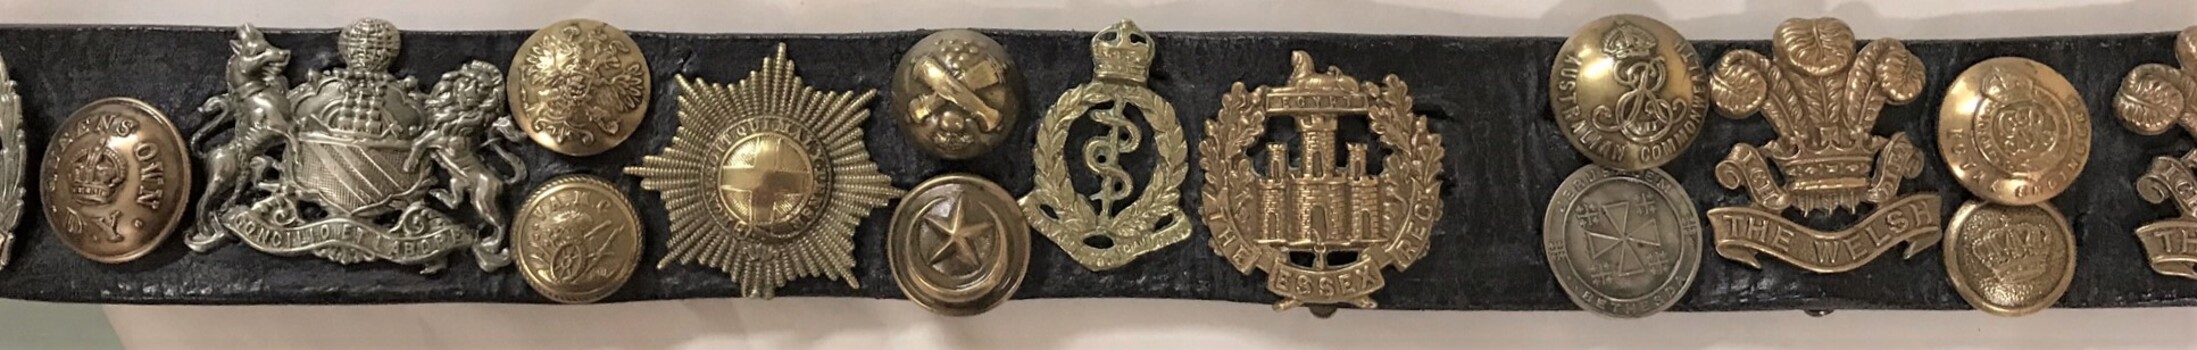 Portion of belt with badges on it